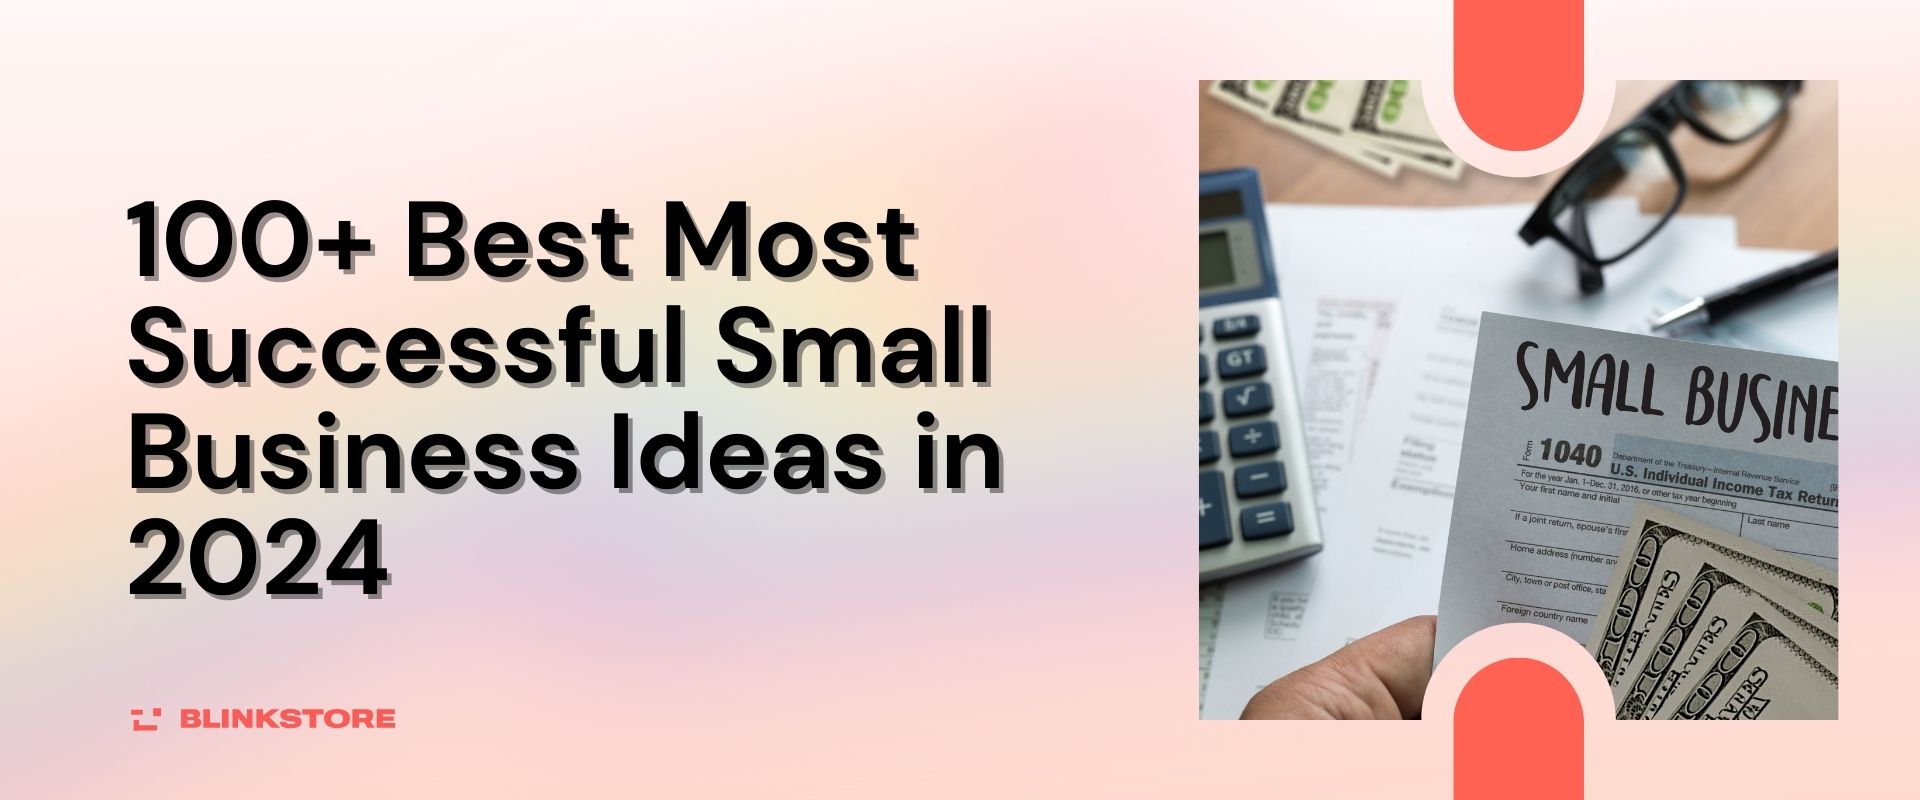 100+ Best Most Successful Small Business Ideas in 2024